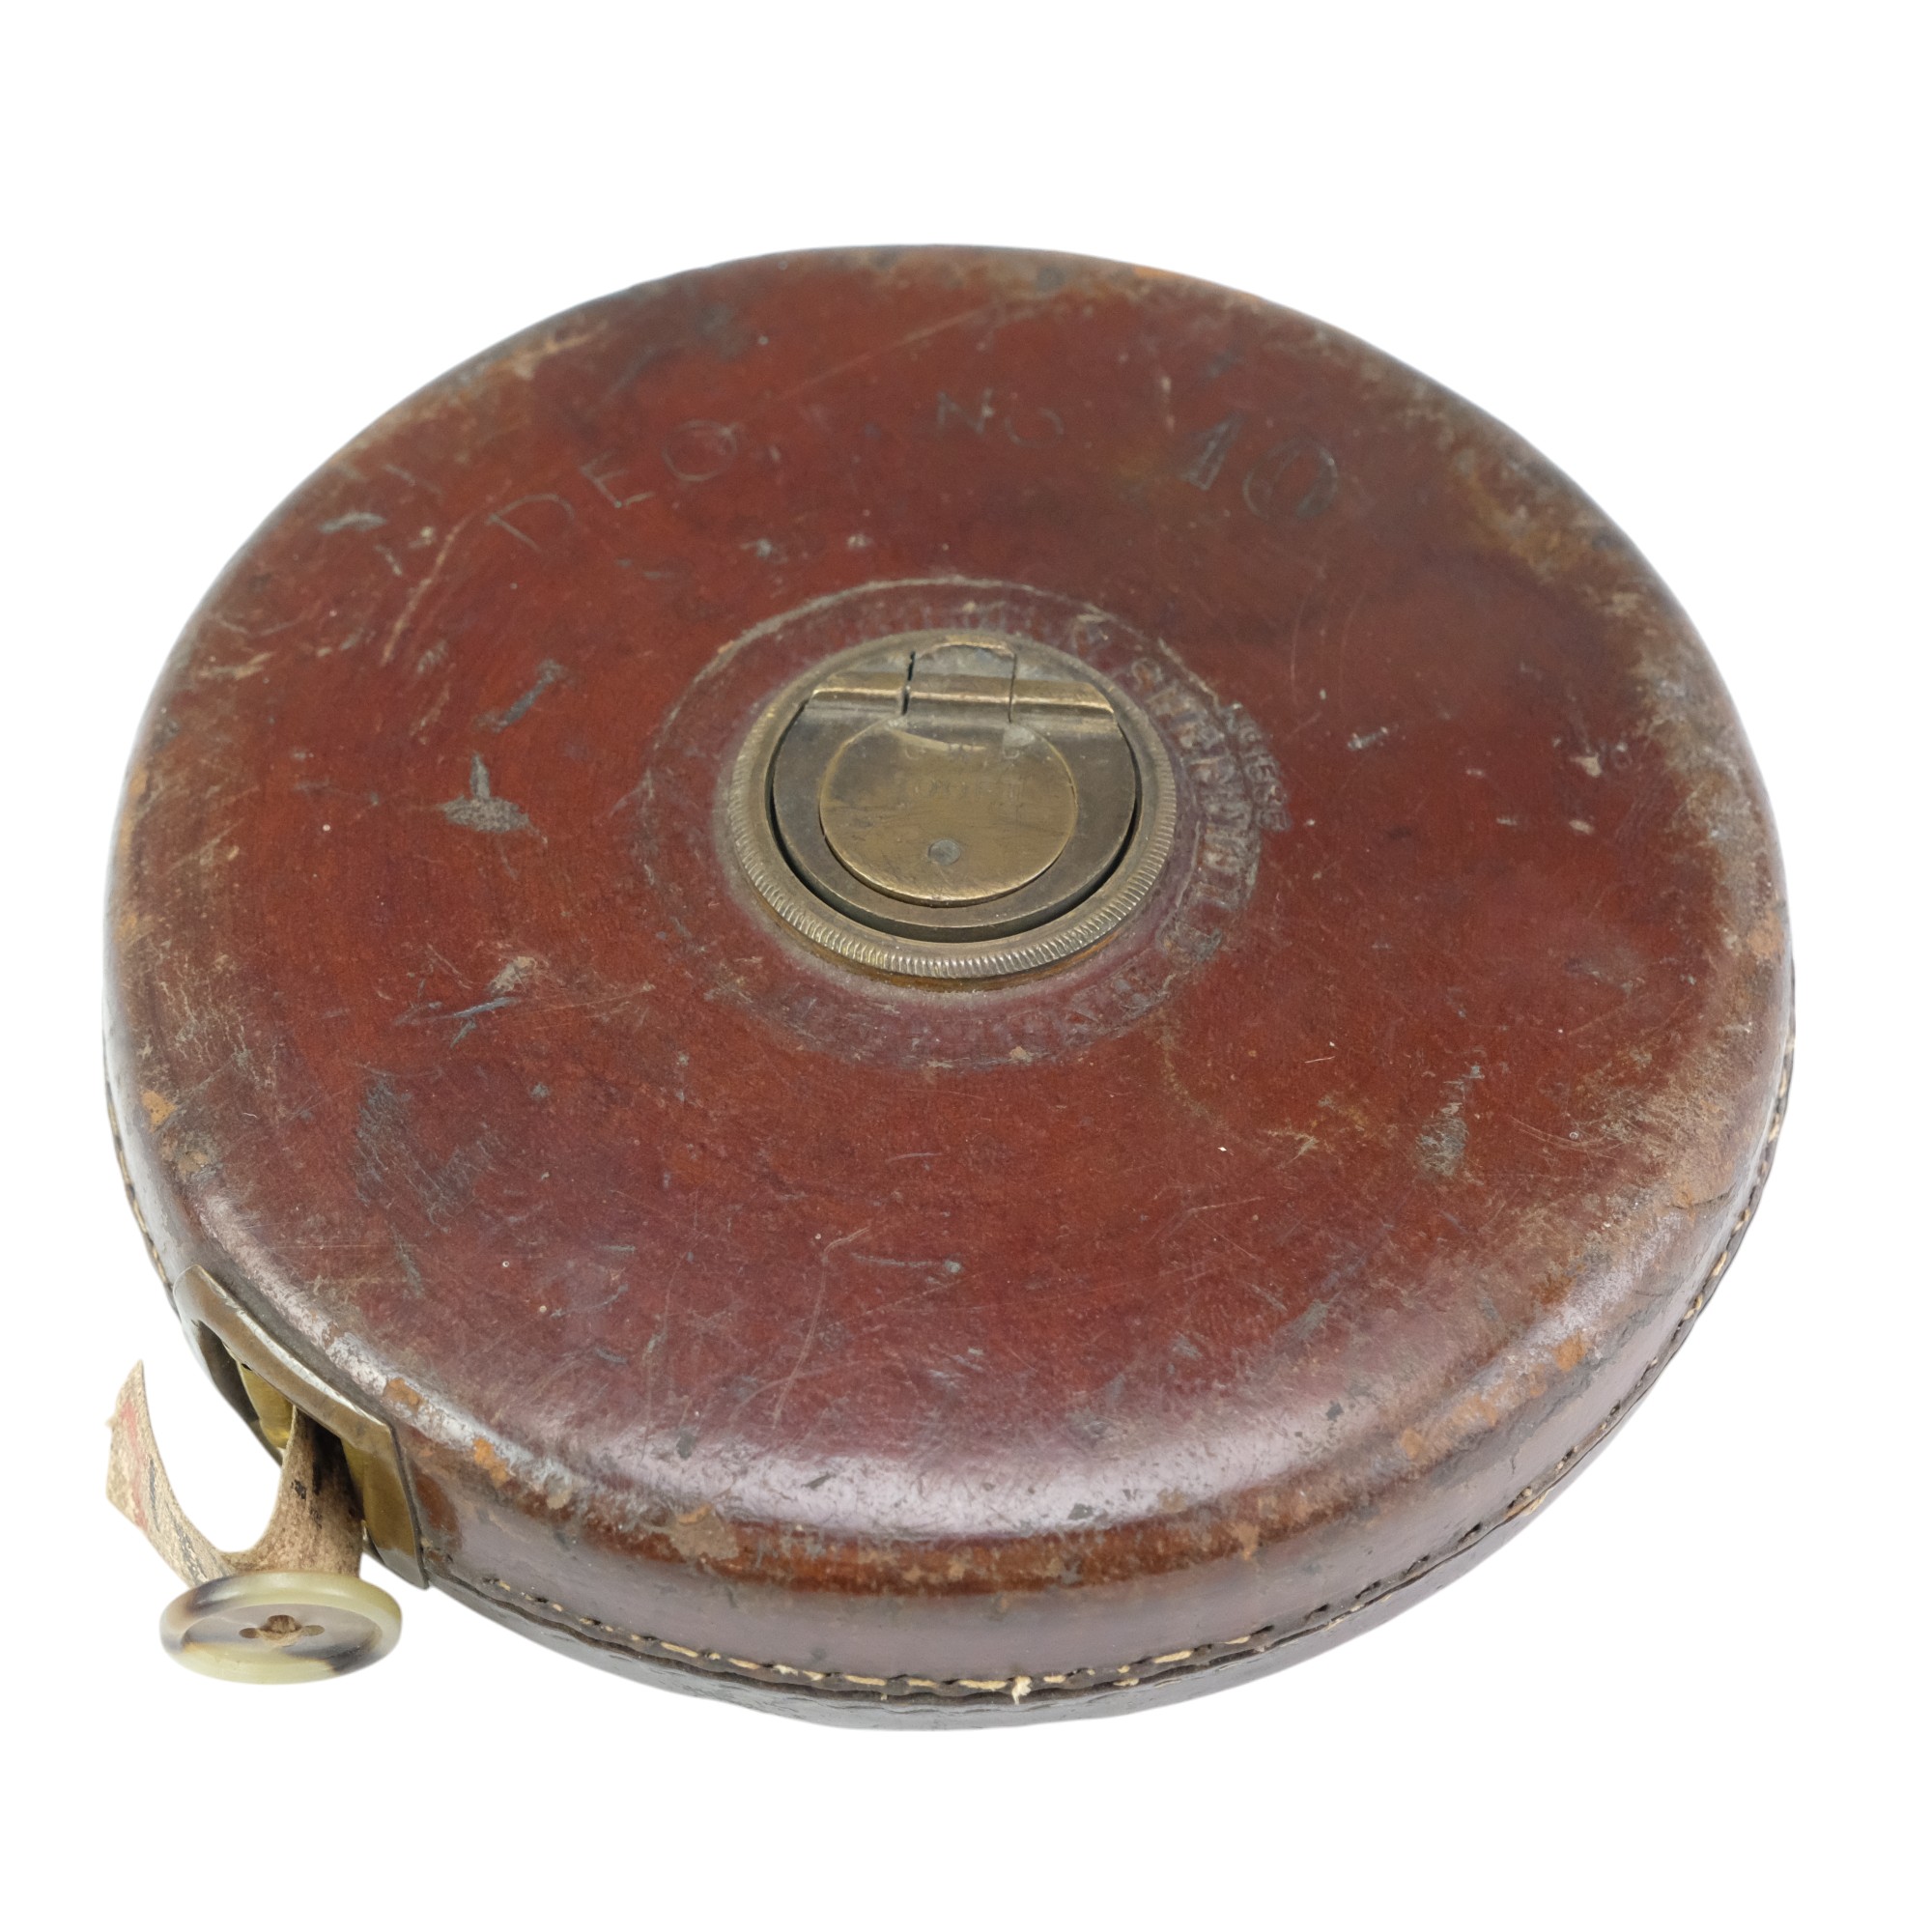 A Great Western Railway Chesterman 100-foot tape measure, 16 cm - Image 2 of 2